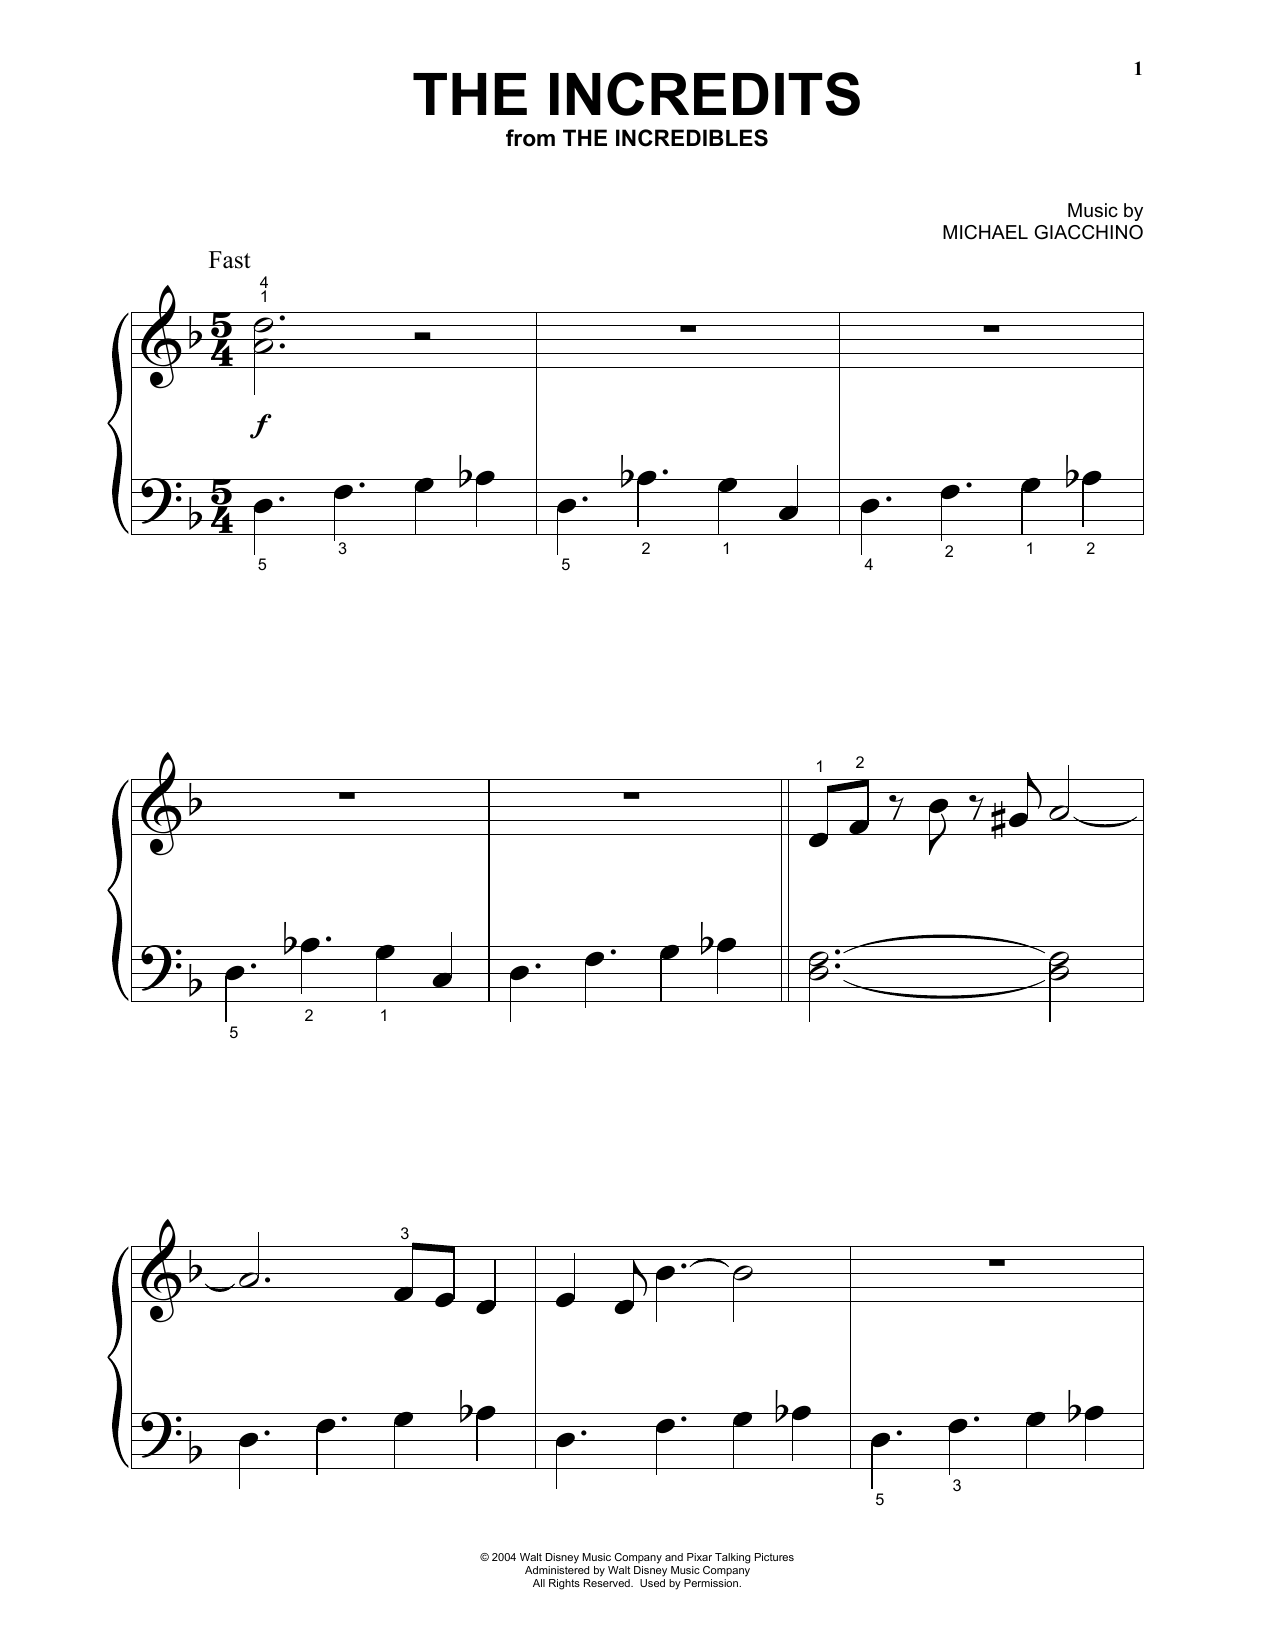 Download Michael Giacchino The Incredits (from The Incredibles) Sheet Music